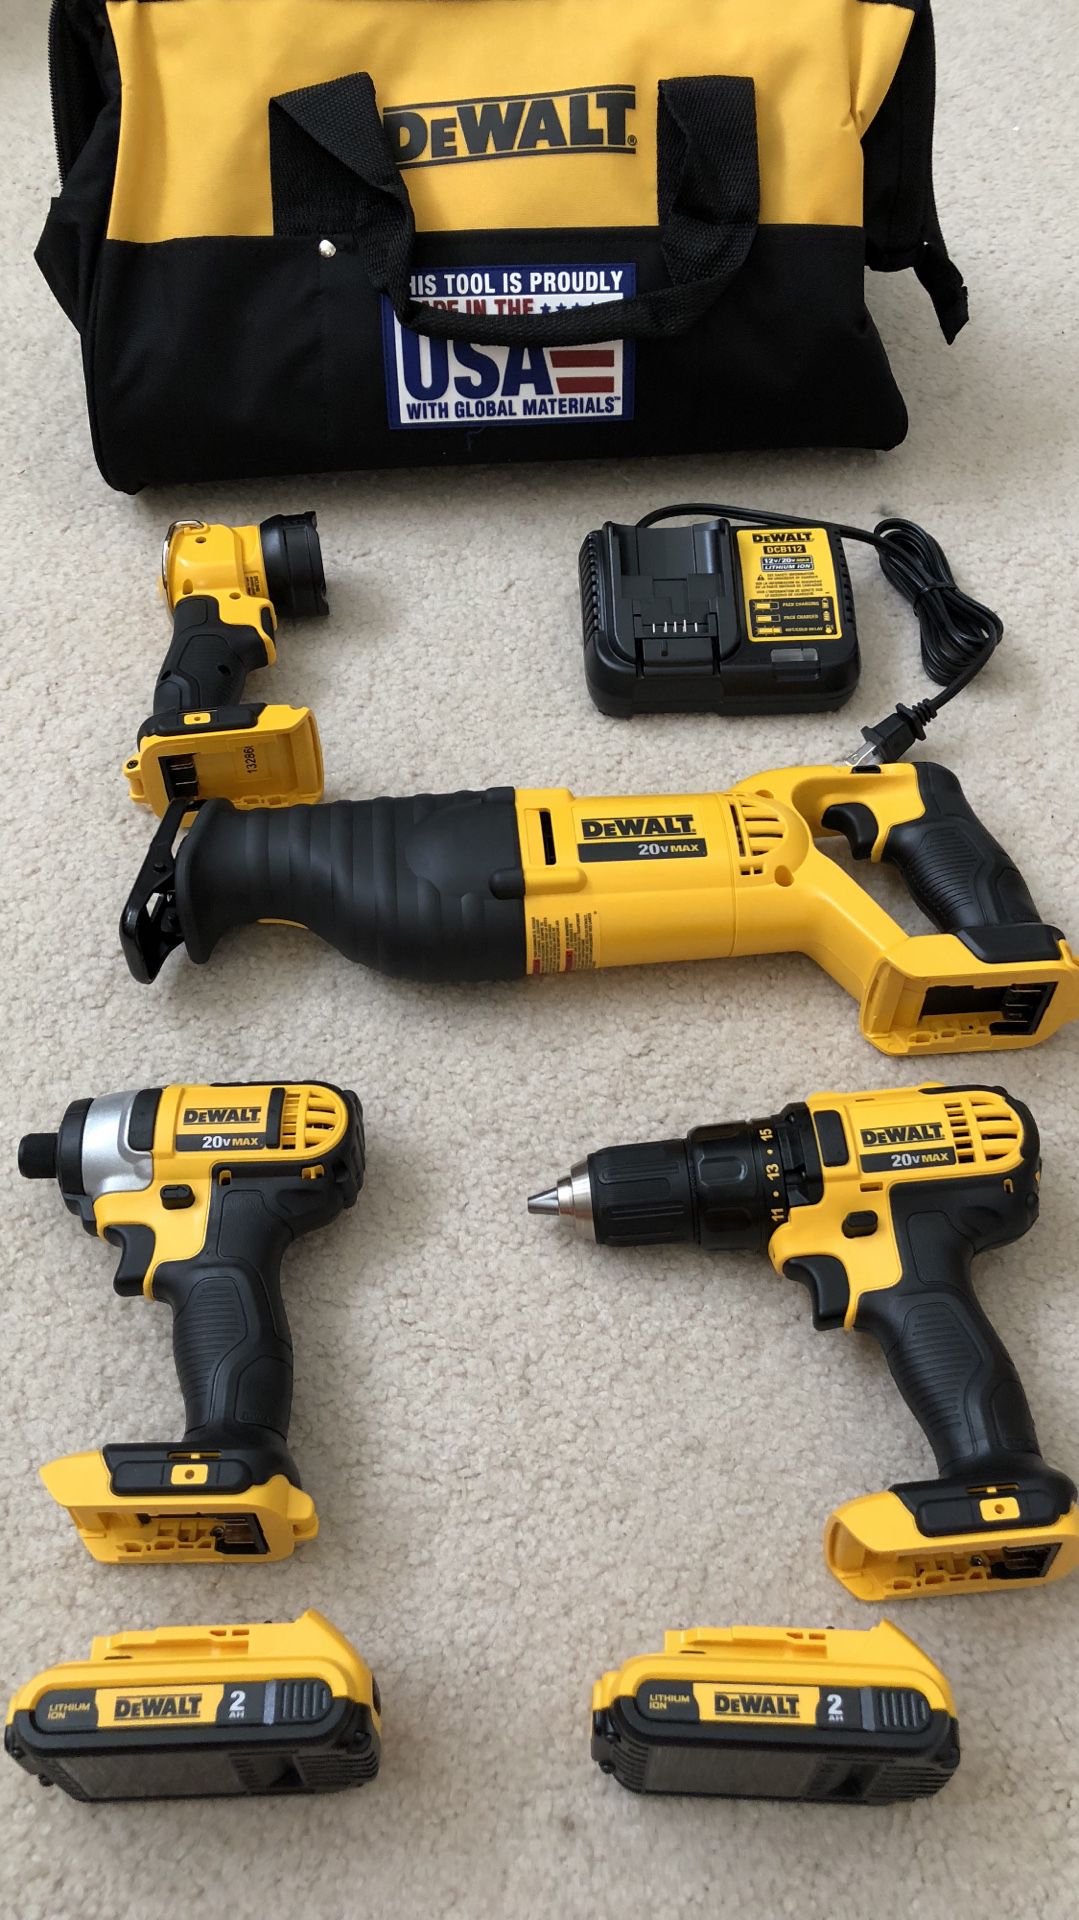 DeWalt 20-Volt MAX Lithium-Ion Cordless Combo Kit (4-Tool) with (2) Batteries, Charger and Contractor Bag